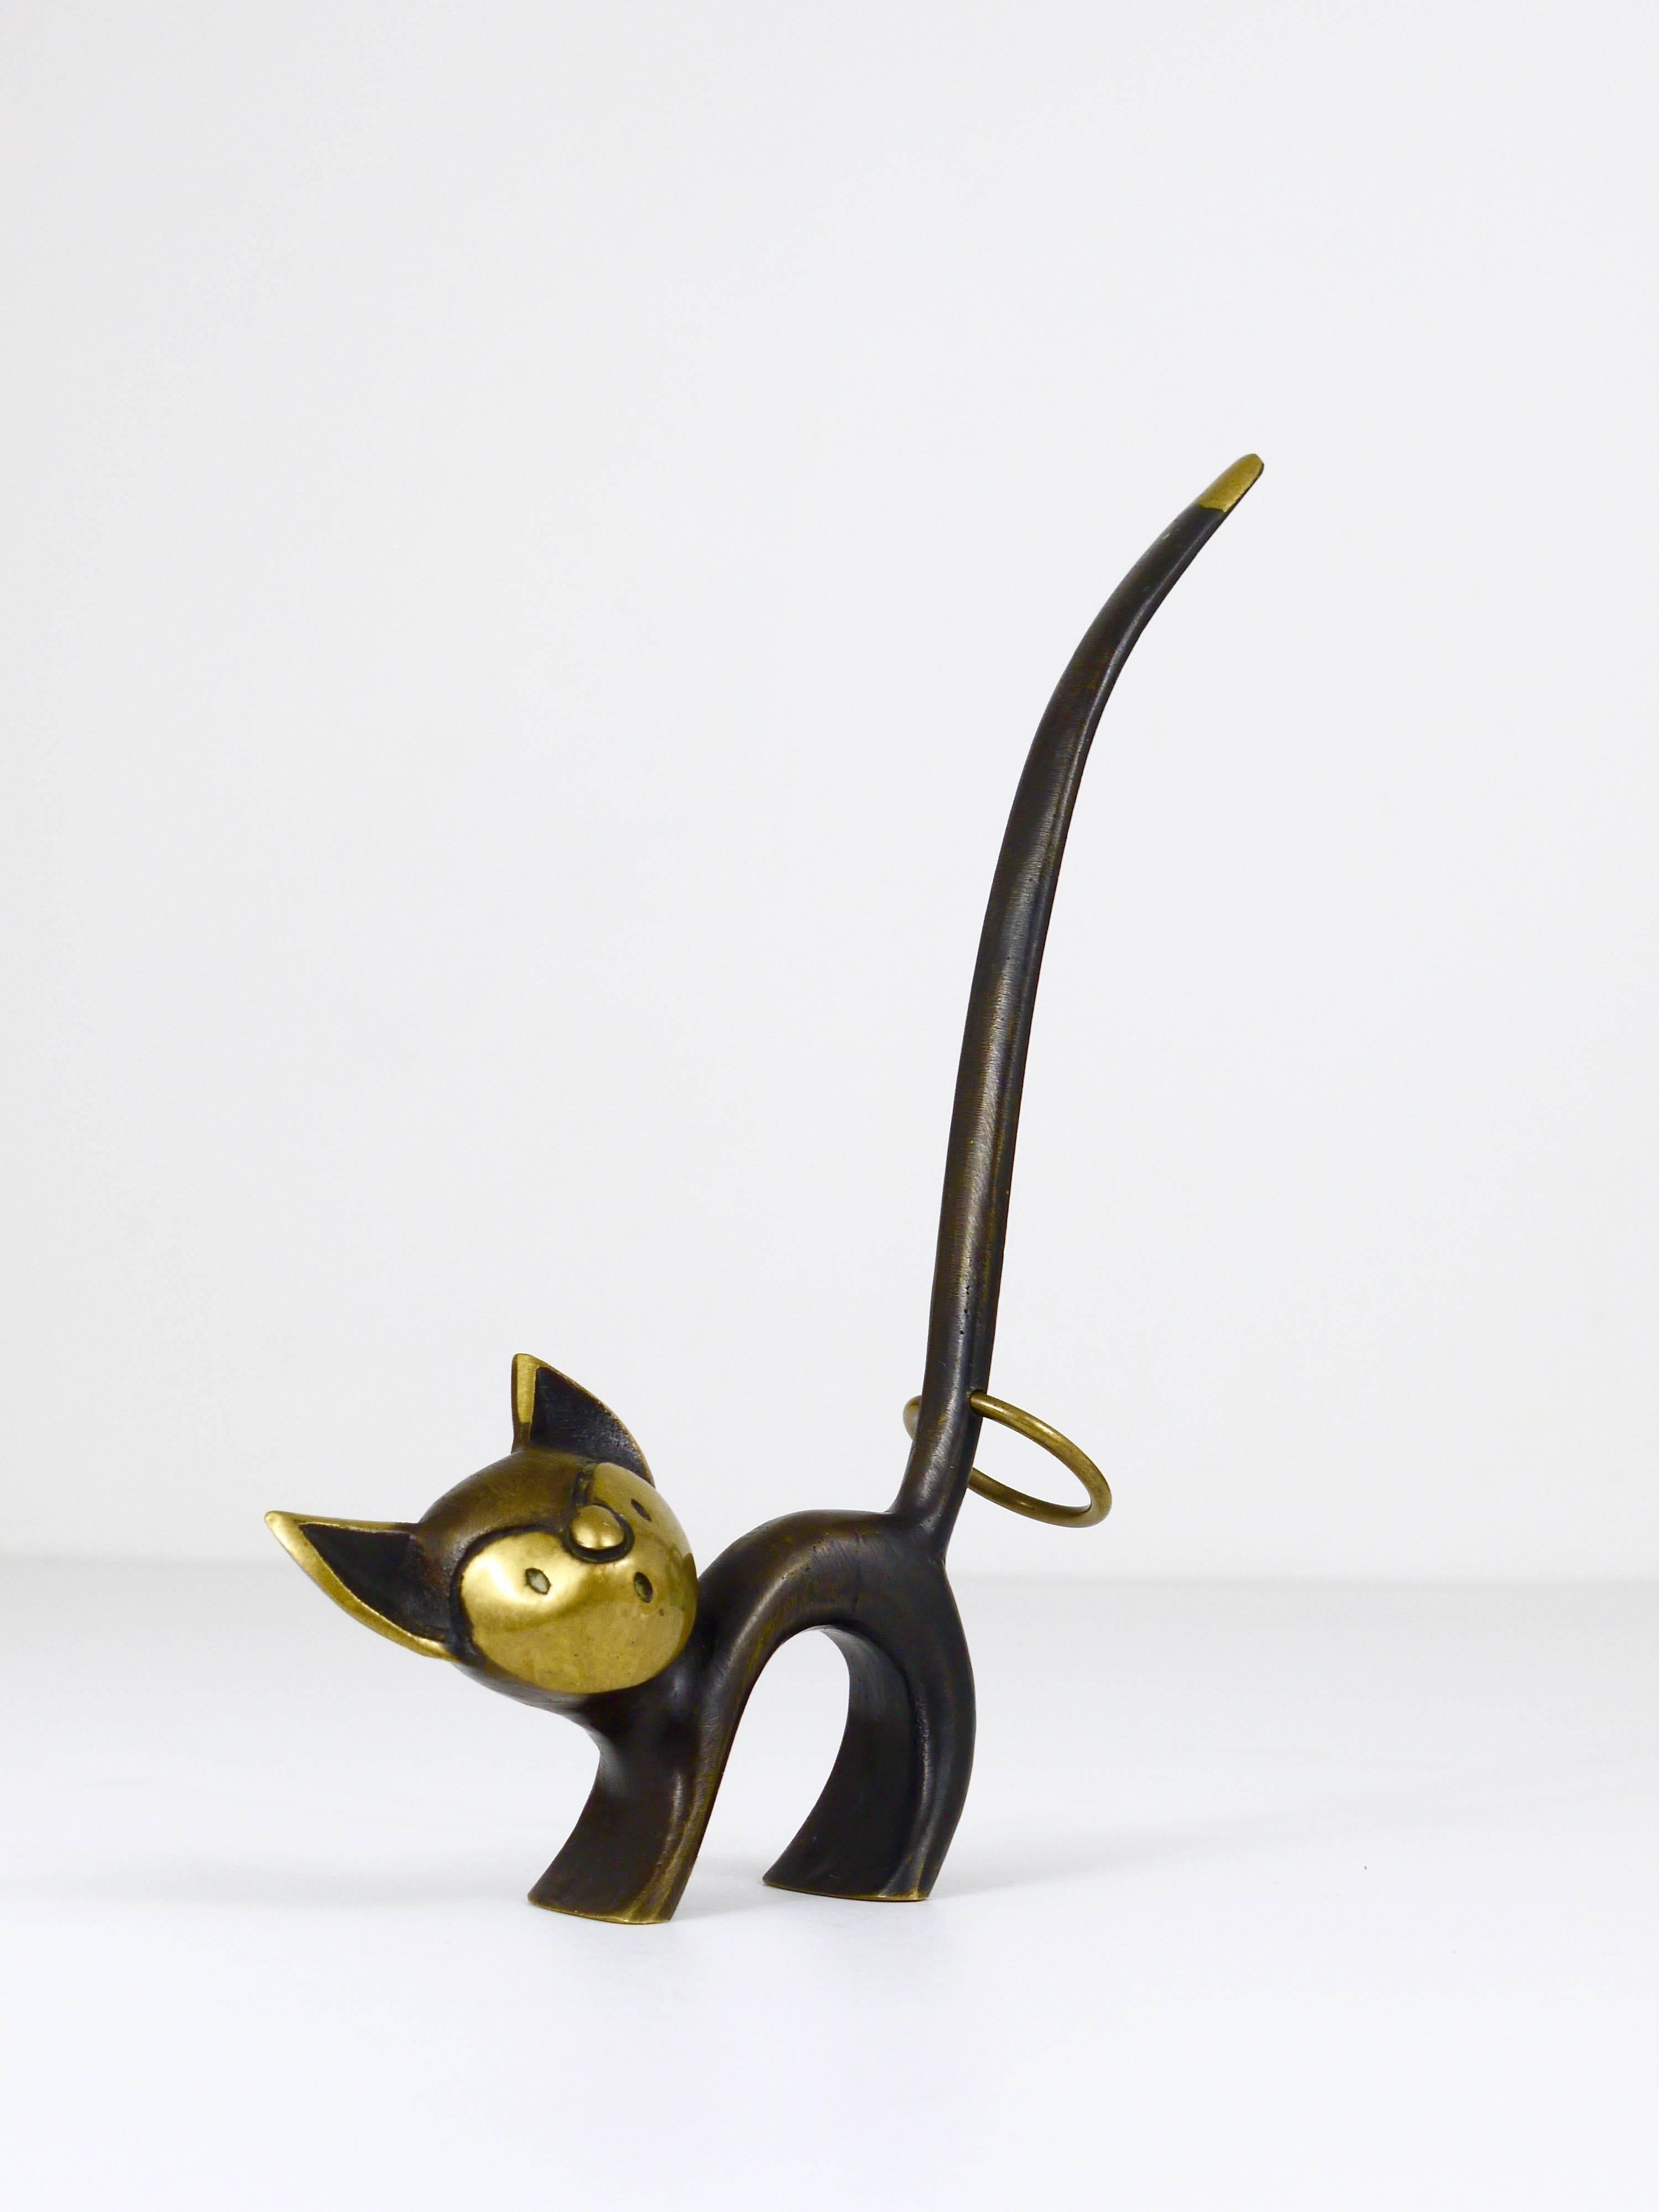 A charming Austrian brass cat figurine usually made to be used as a pretzel holder, a decorative piece, very suitable as a ring holder. A very humorous design by Walter Bosse, executed by Hertha Baller, Austria in the 1950s. Made of brass, in very